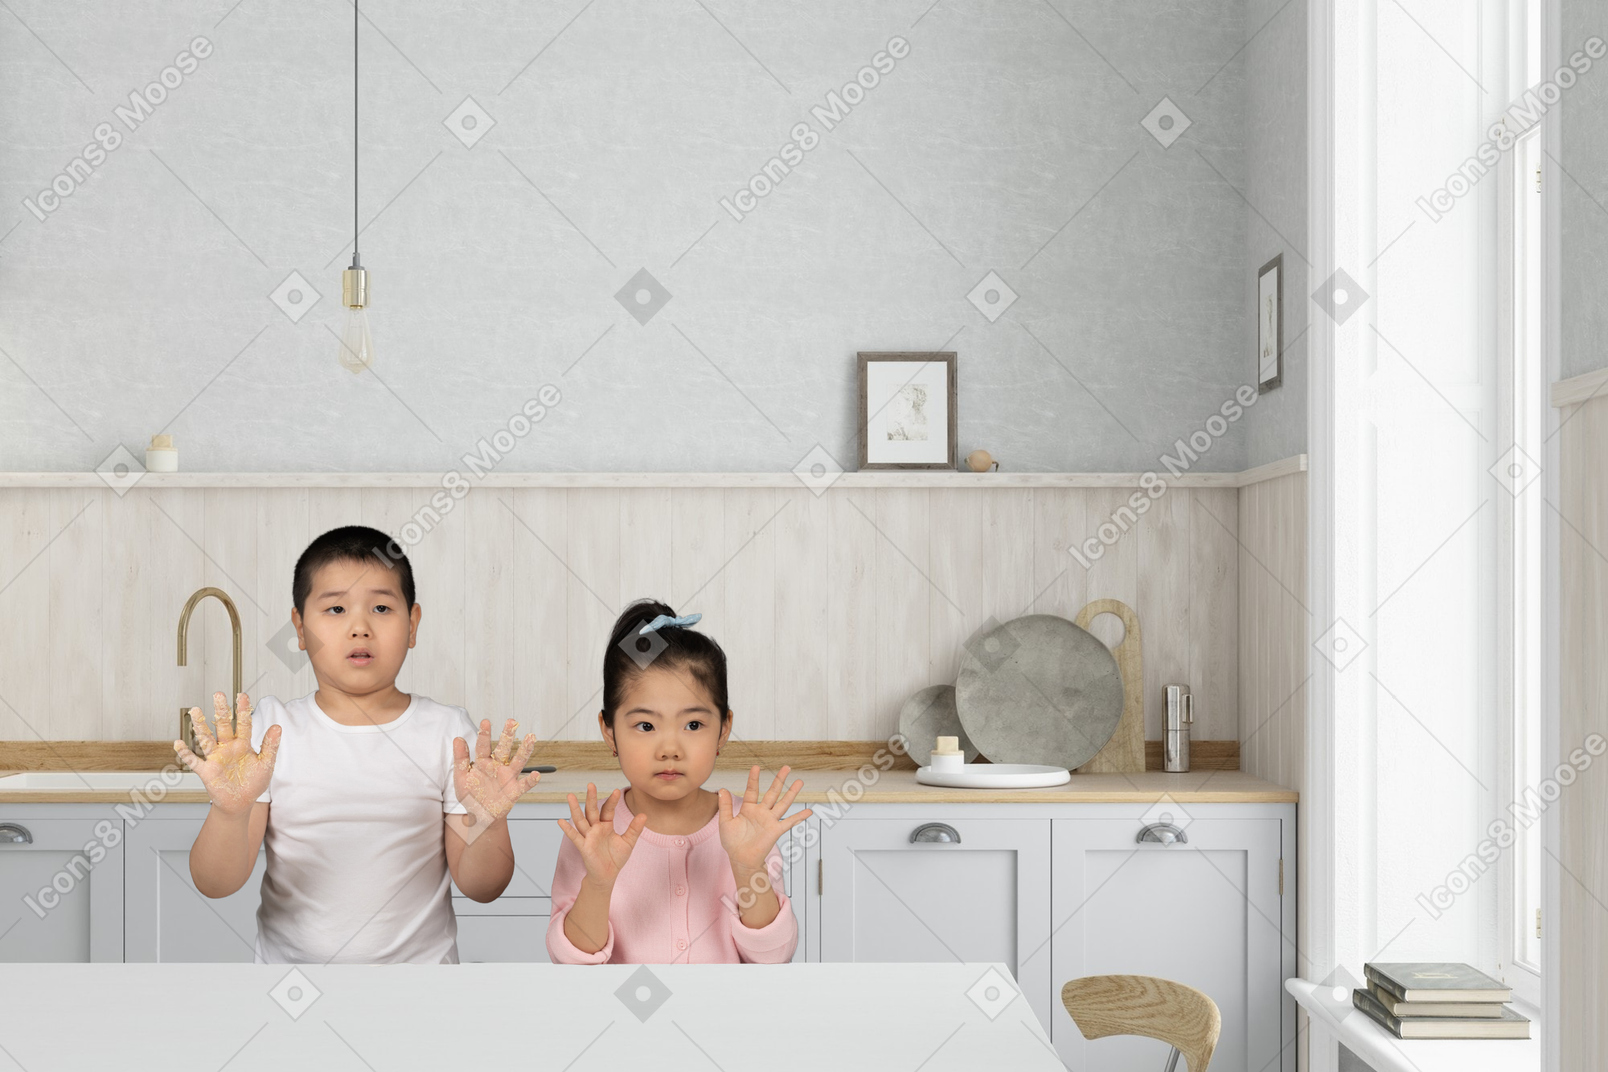 A couple of kids standing in a kitchen